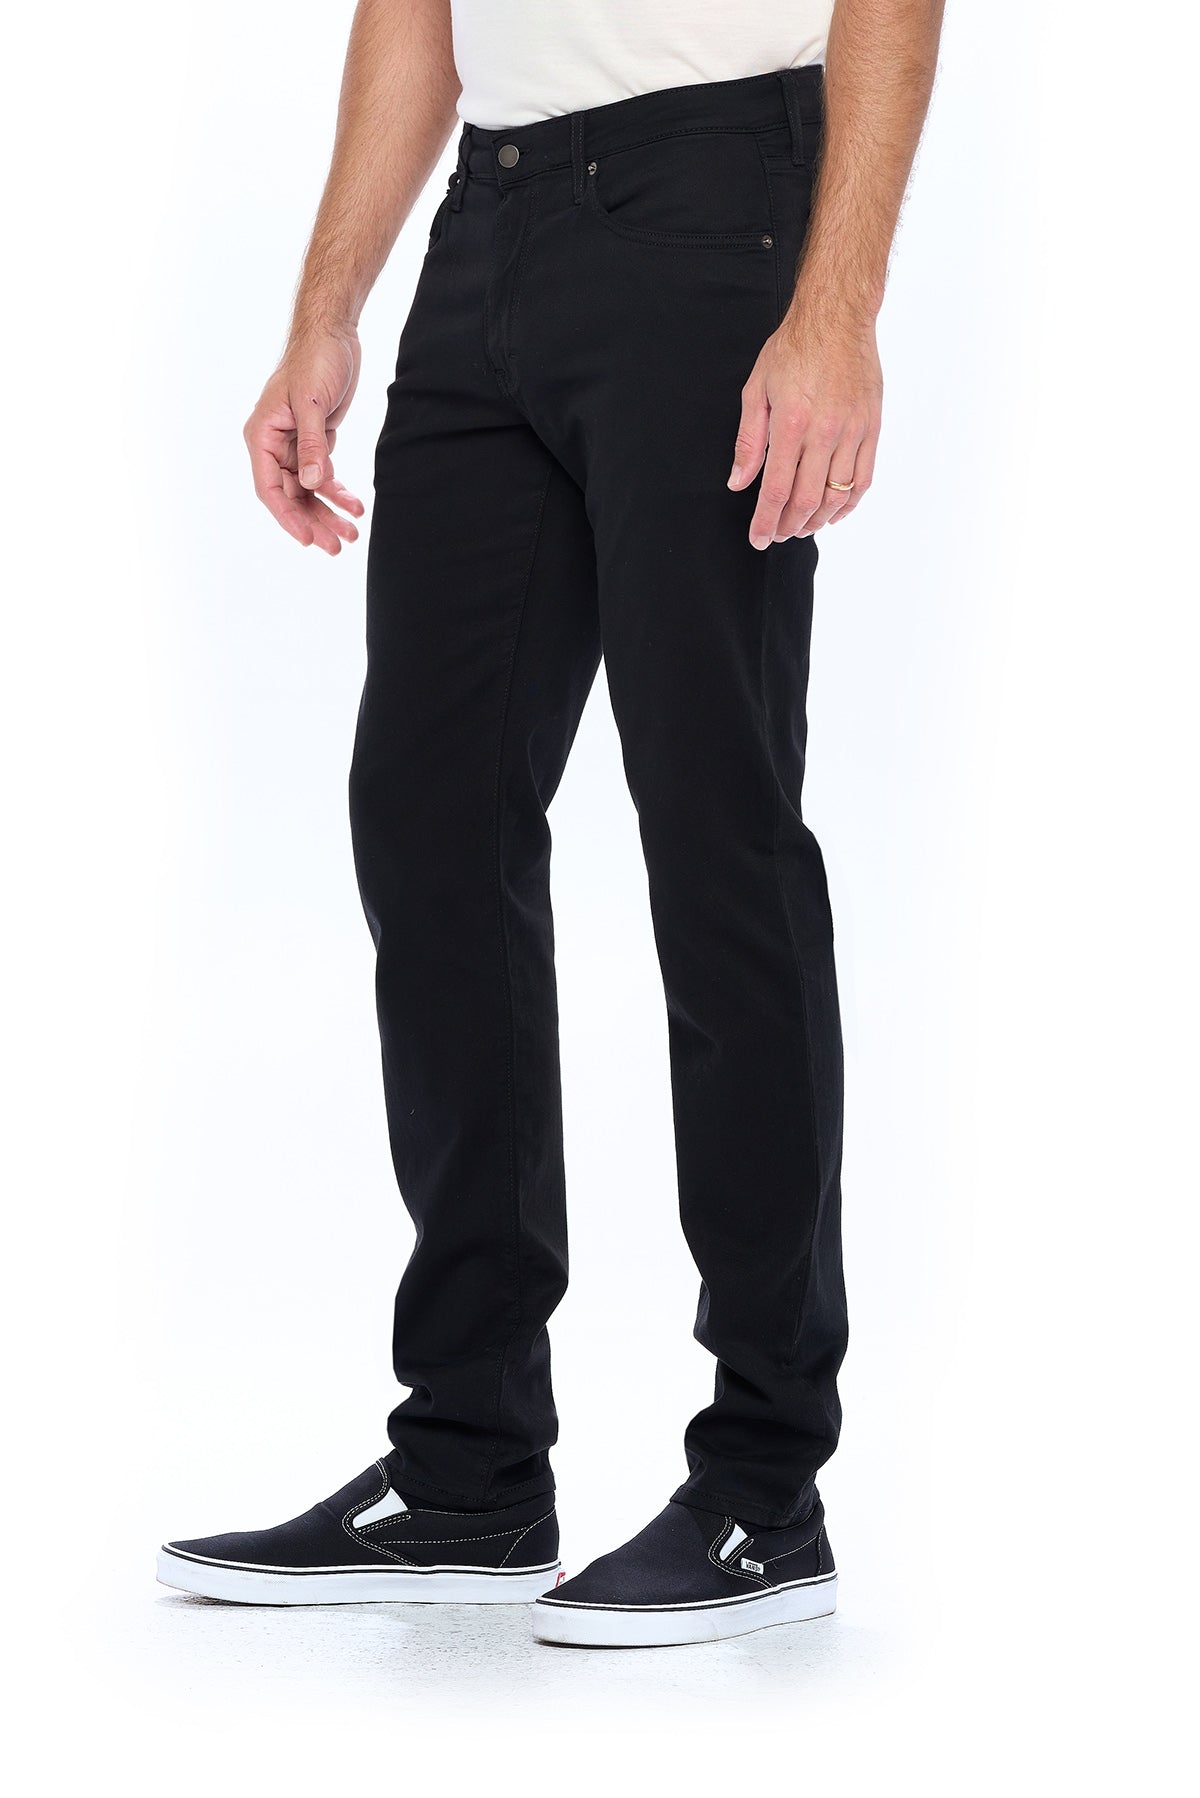 Buy Black Jeans For Men At Best Prices Online In India | Tata CLiQ